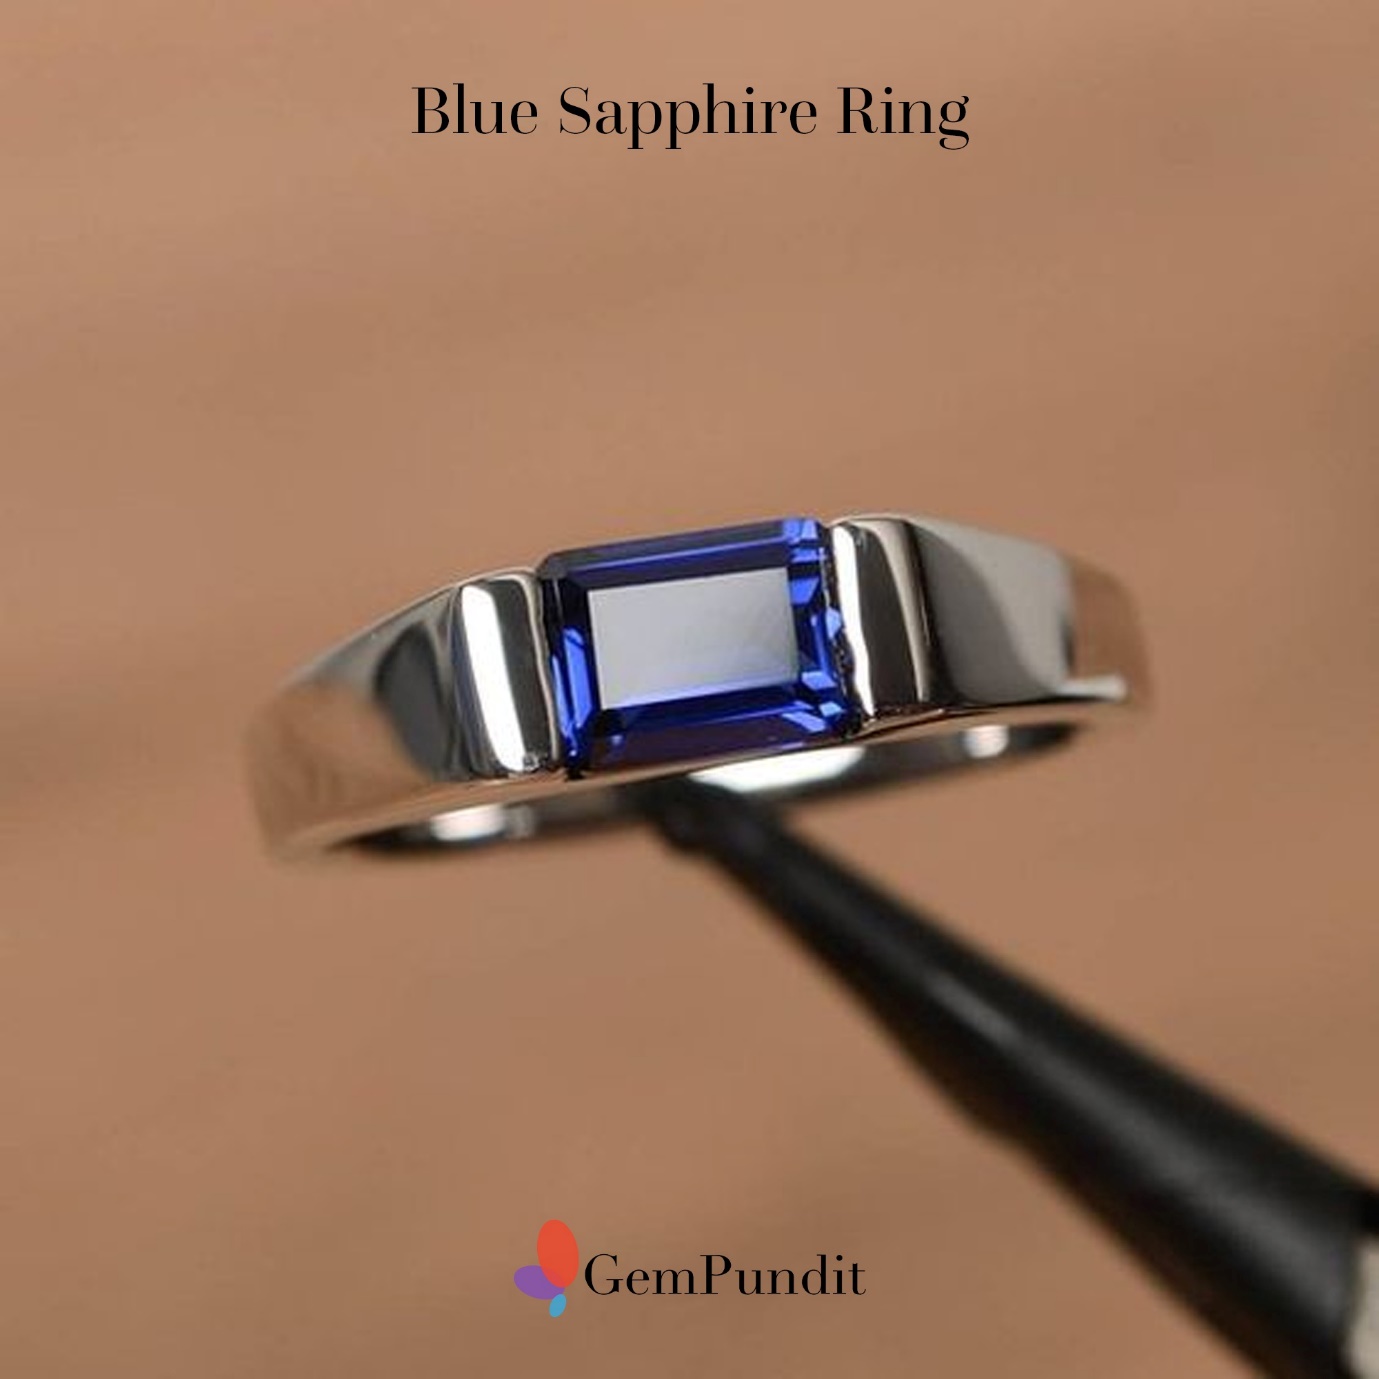 May be an image of ring and text that says "Blue Sapphire Ring GemPundit"